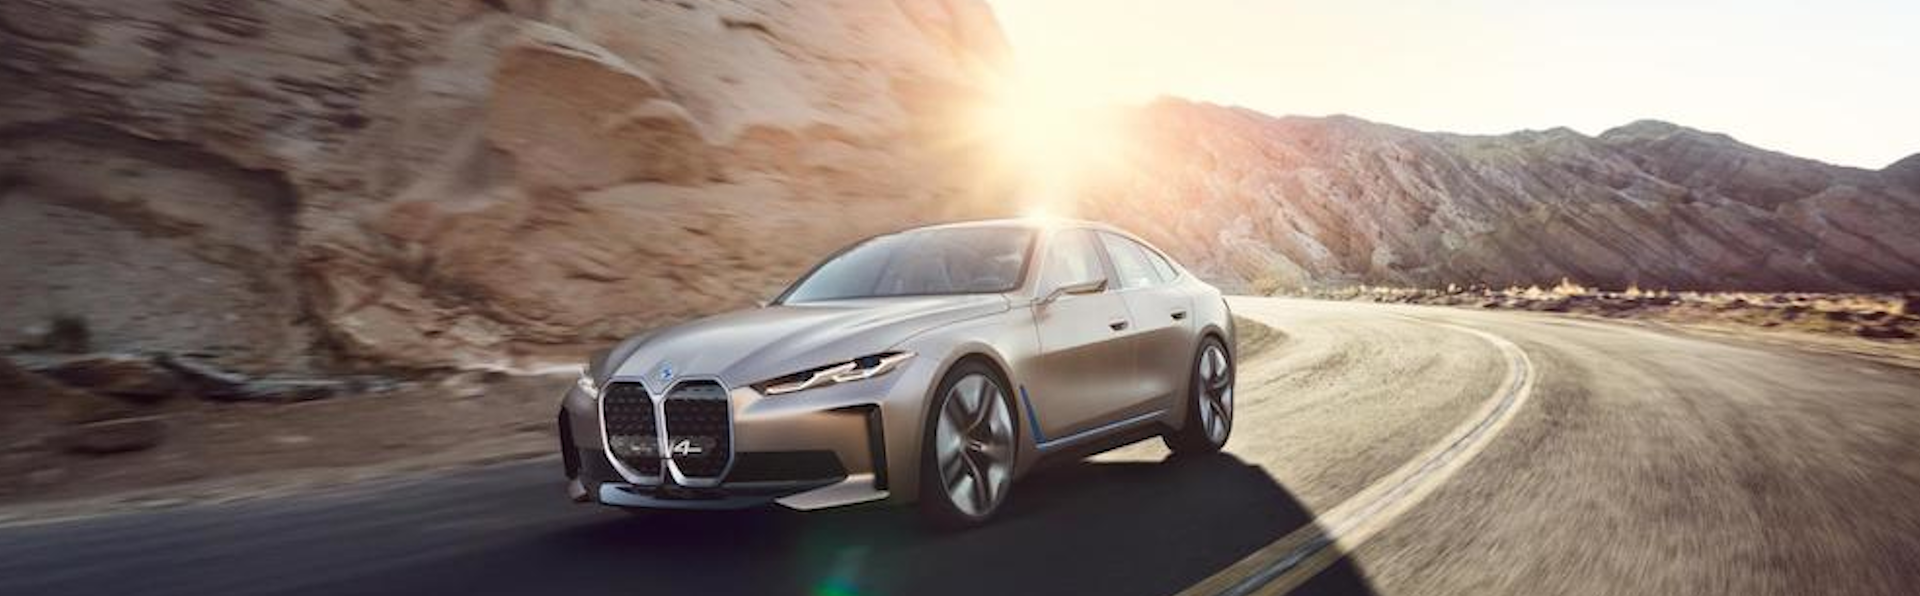 New BMW i4 demonstrates the sound of electrification 